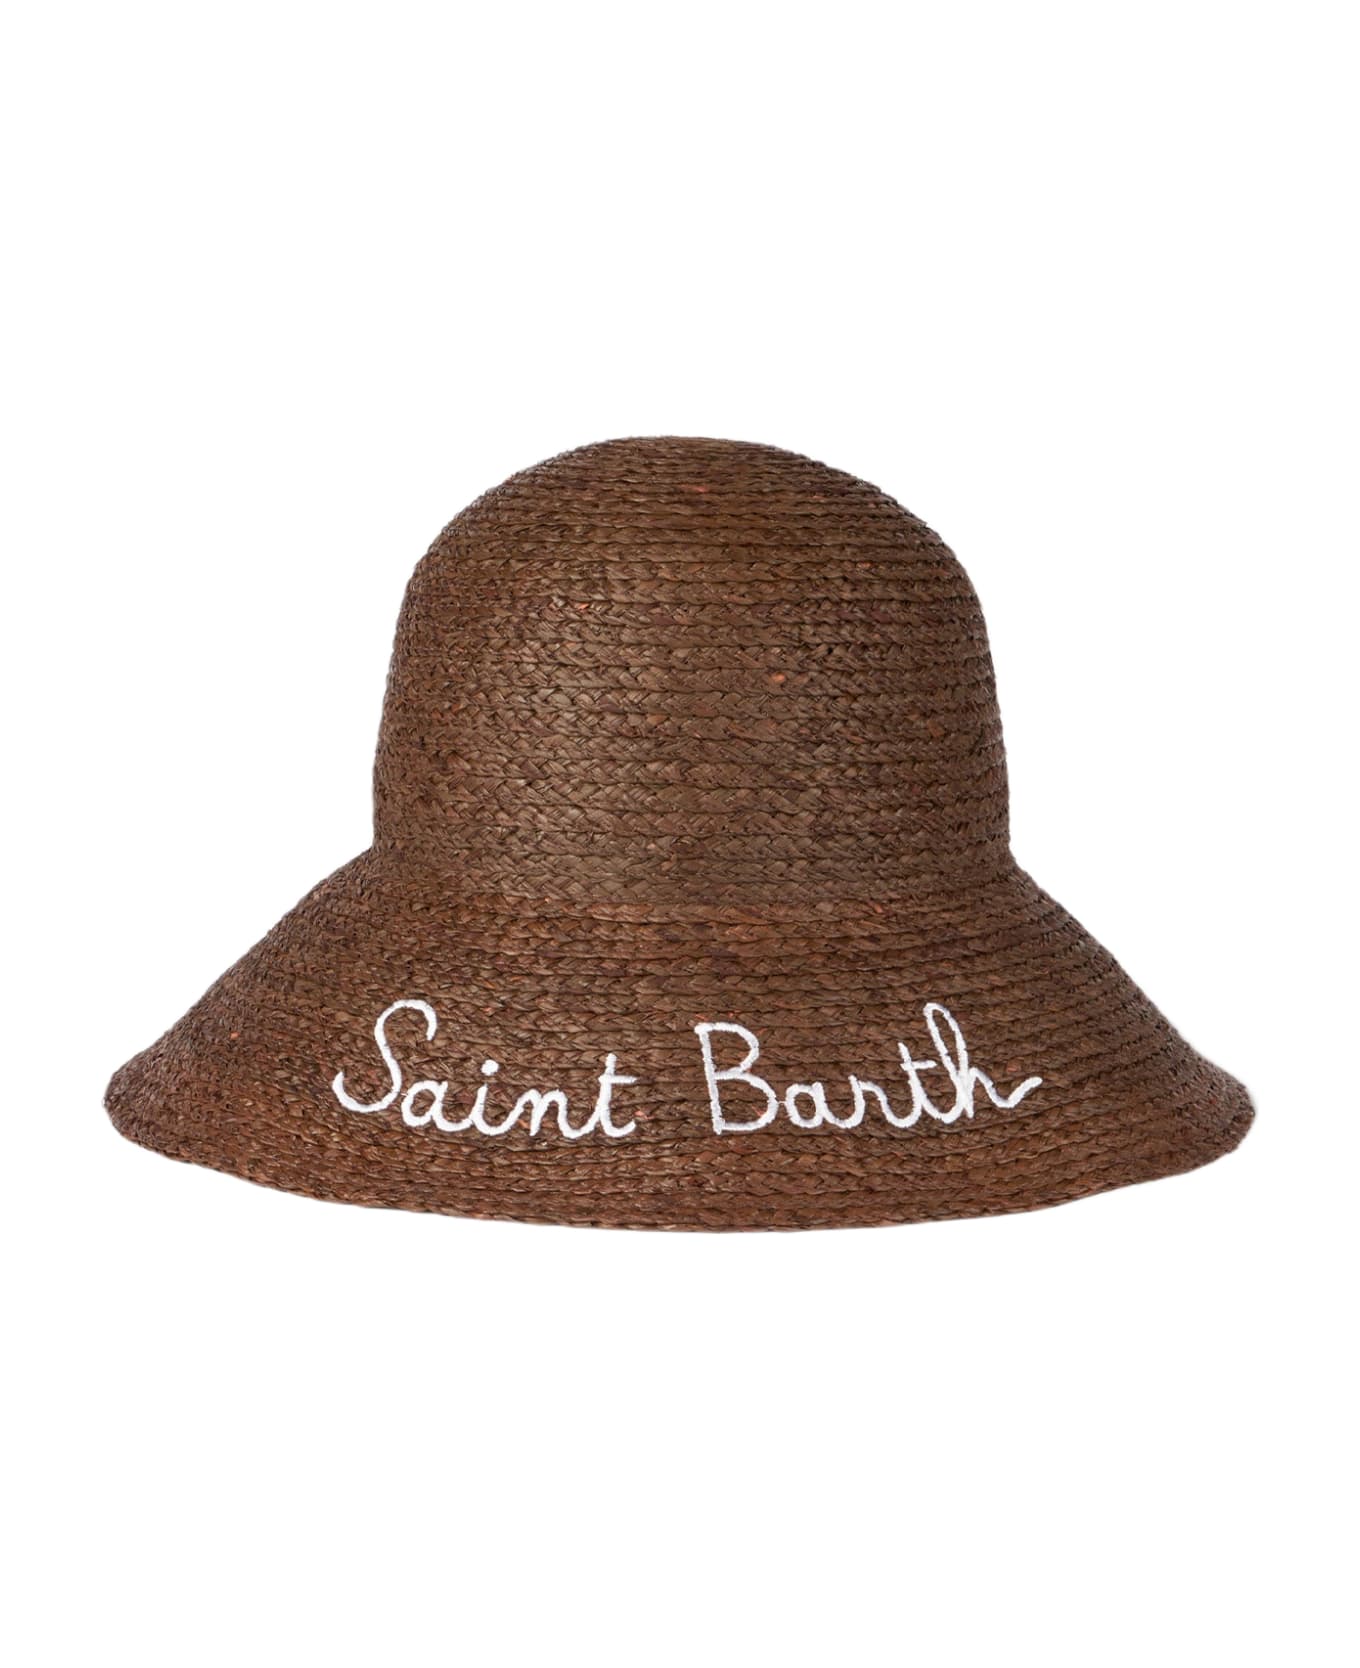 MC2 Saint Barth Woman Straw Light Brown Bucket With Front Embroidery - BROWN 帽子